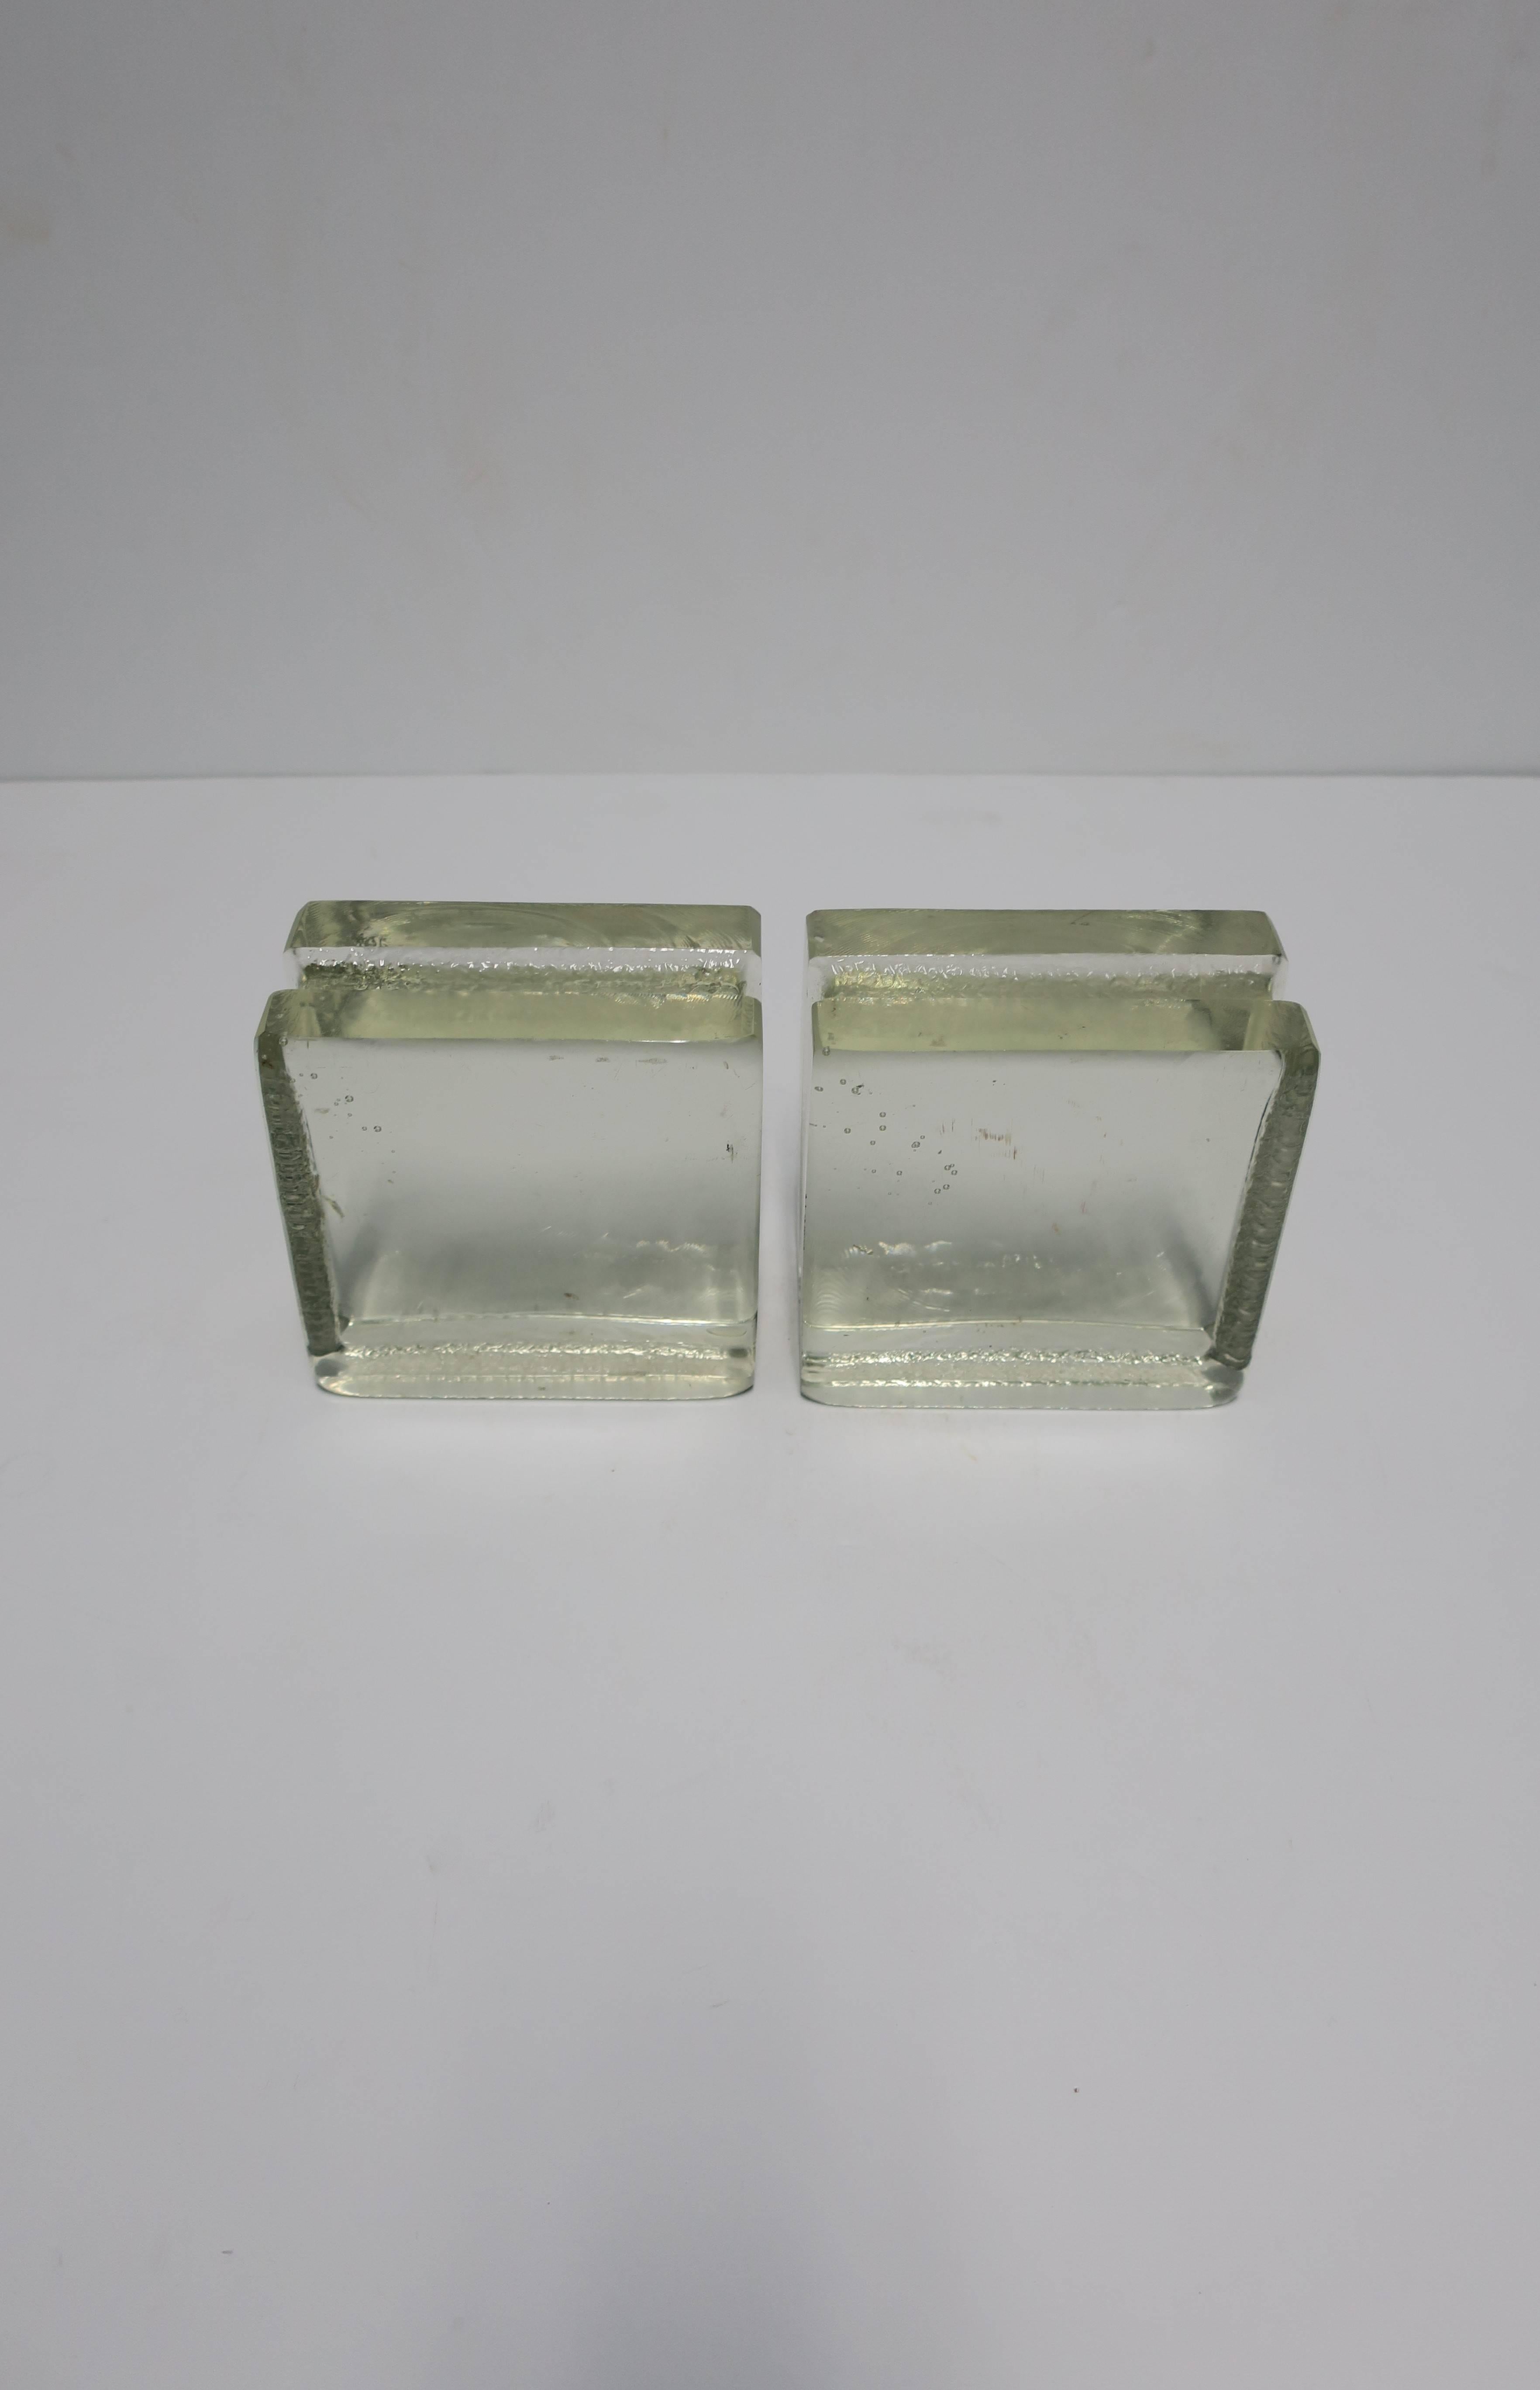 A pair of Postmodern or Modern style solid clear glass-block bookends. 

Each measure 5 in. H x 5 in. W x 2.5 in. D. 

